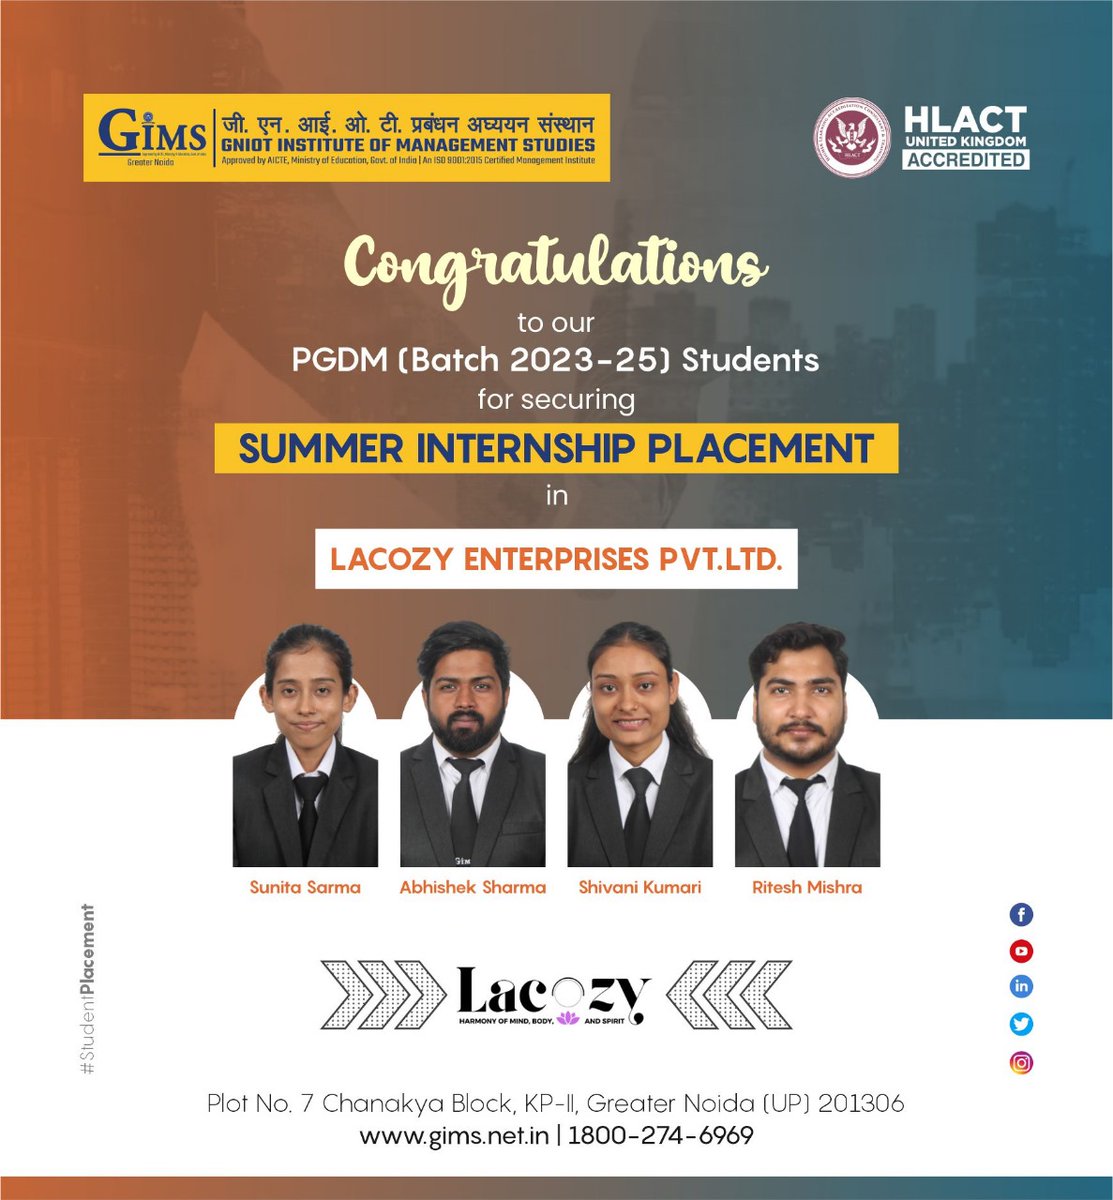 GIMS, Greater Noida proudly announces the SIP selection of its PGDM 2023-25 Batch students in Lacozy Enterprises Pvt. Ltd. We wish them the best for a great learning experience ahead! Visit our Website: gniotgroup.edu.in Toll Free No.: 18002746969 #gims #gniot #gimsian